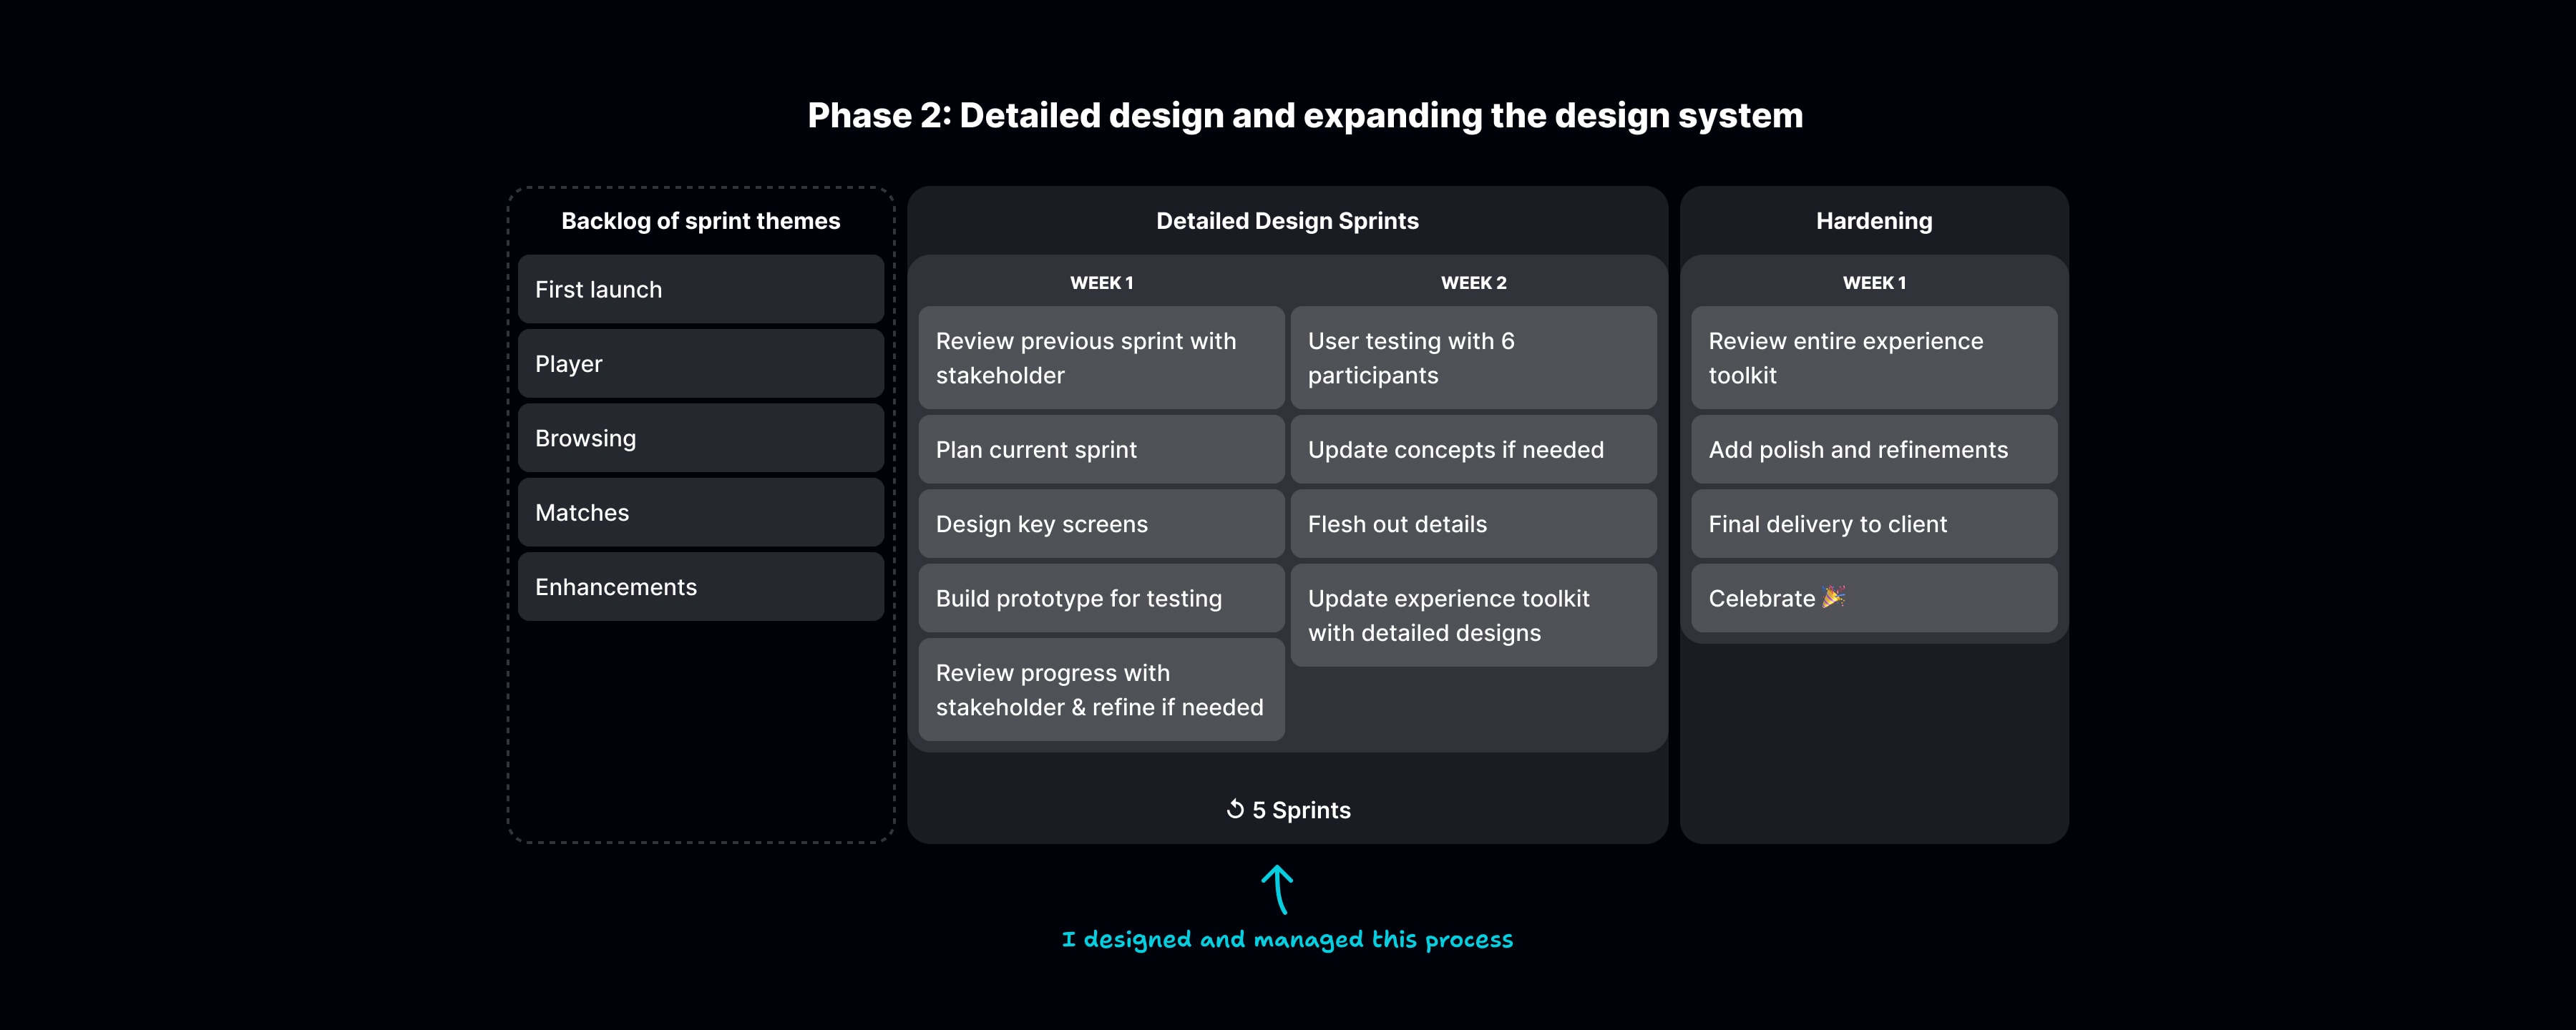 Phase 2: Detailed design & expanding the design system